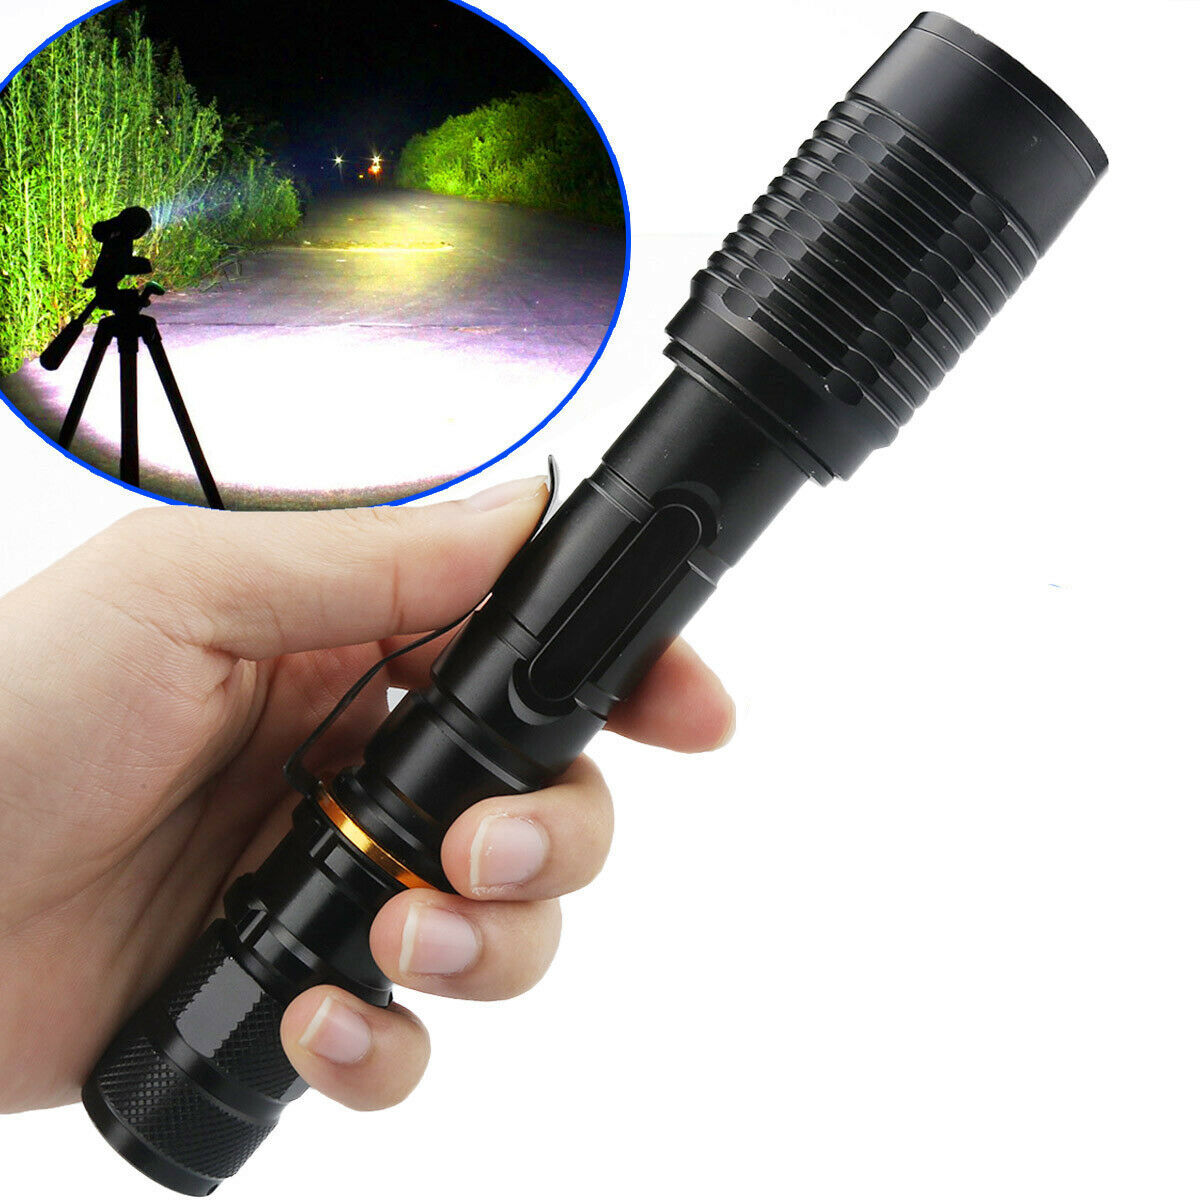 990000 Lumens Tactical 5 Modes Military T6 LED Flashlight +18650 +Charger